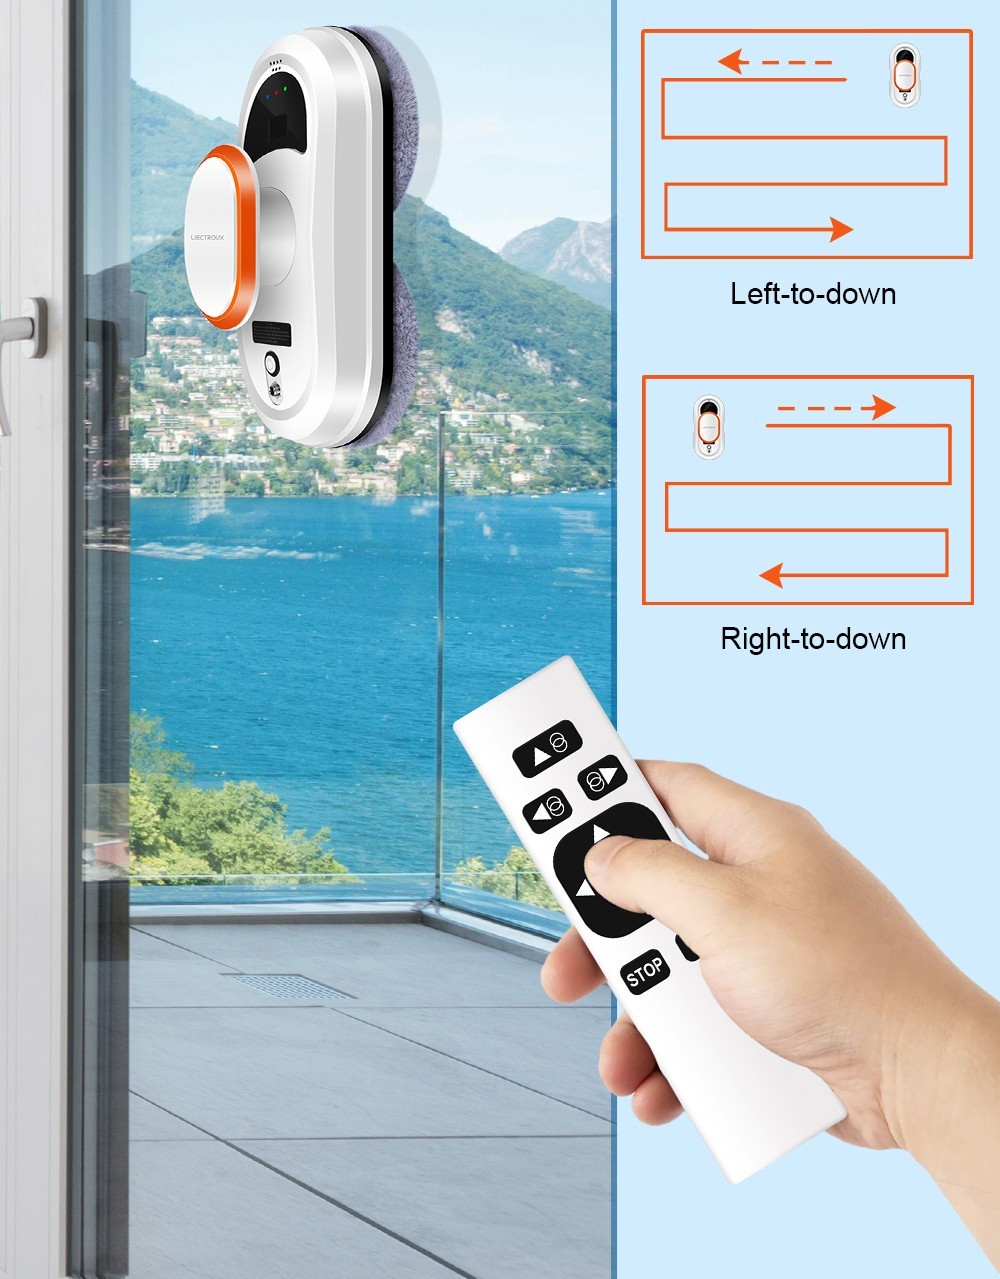 Liectroux HCR-09 Window Cleaning Robot, 2800Pa Suction, 3 Auto Cleaning Modes, UPS Function, Edge Detection